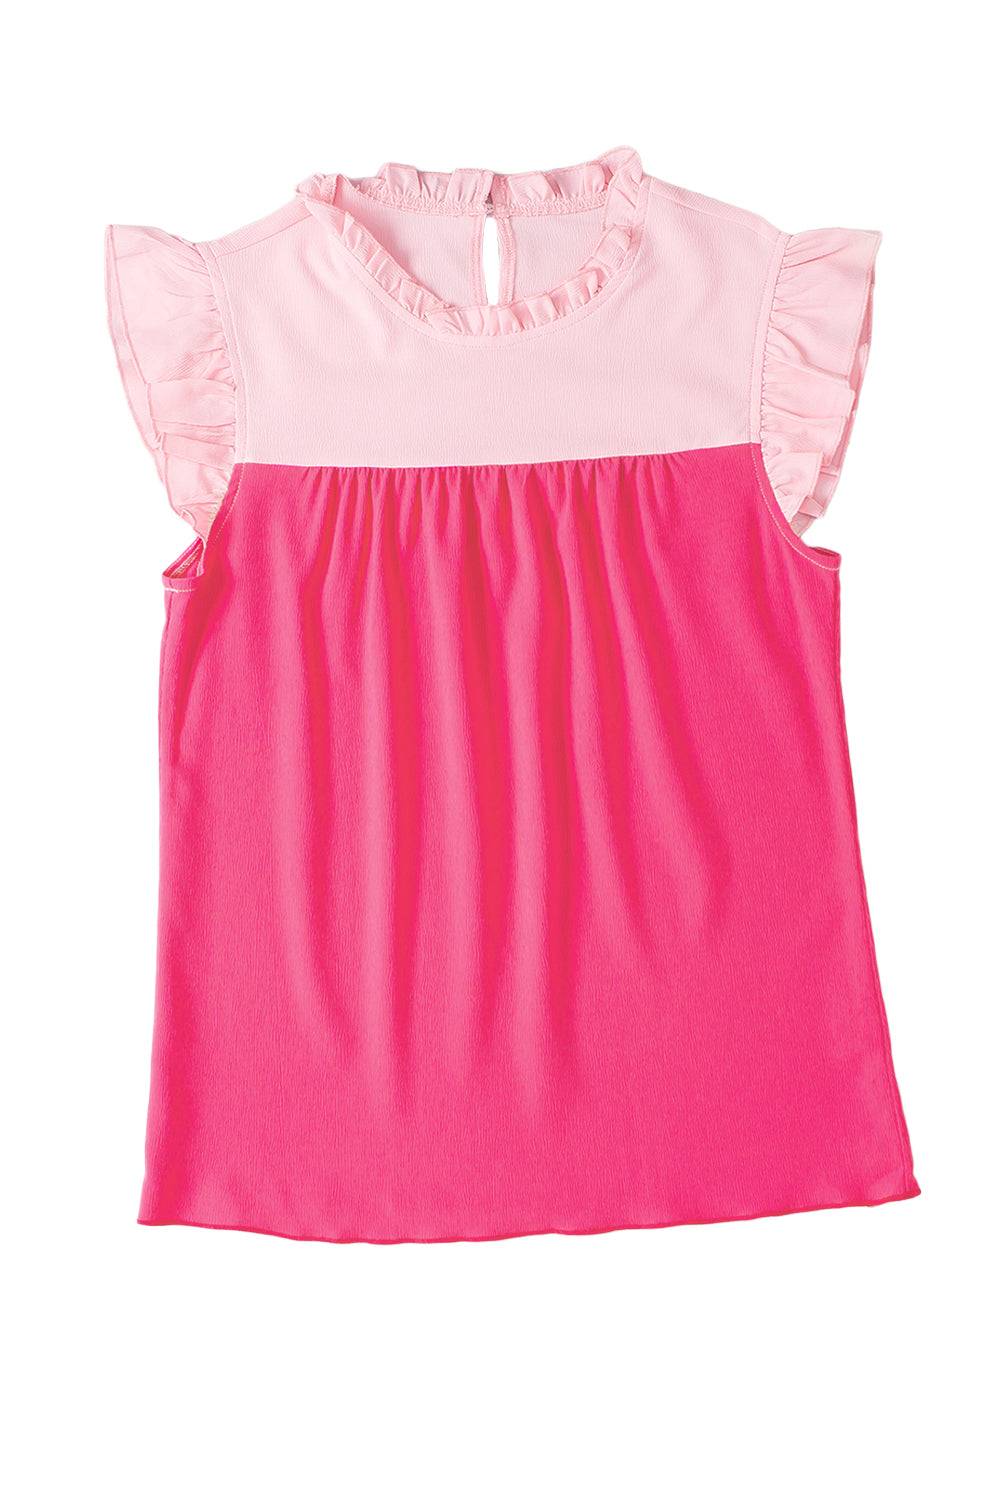 a pink and white top with ruffles on the shoulders